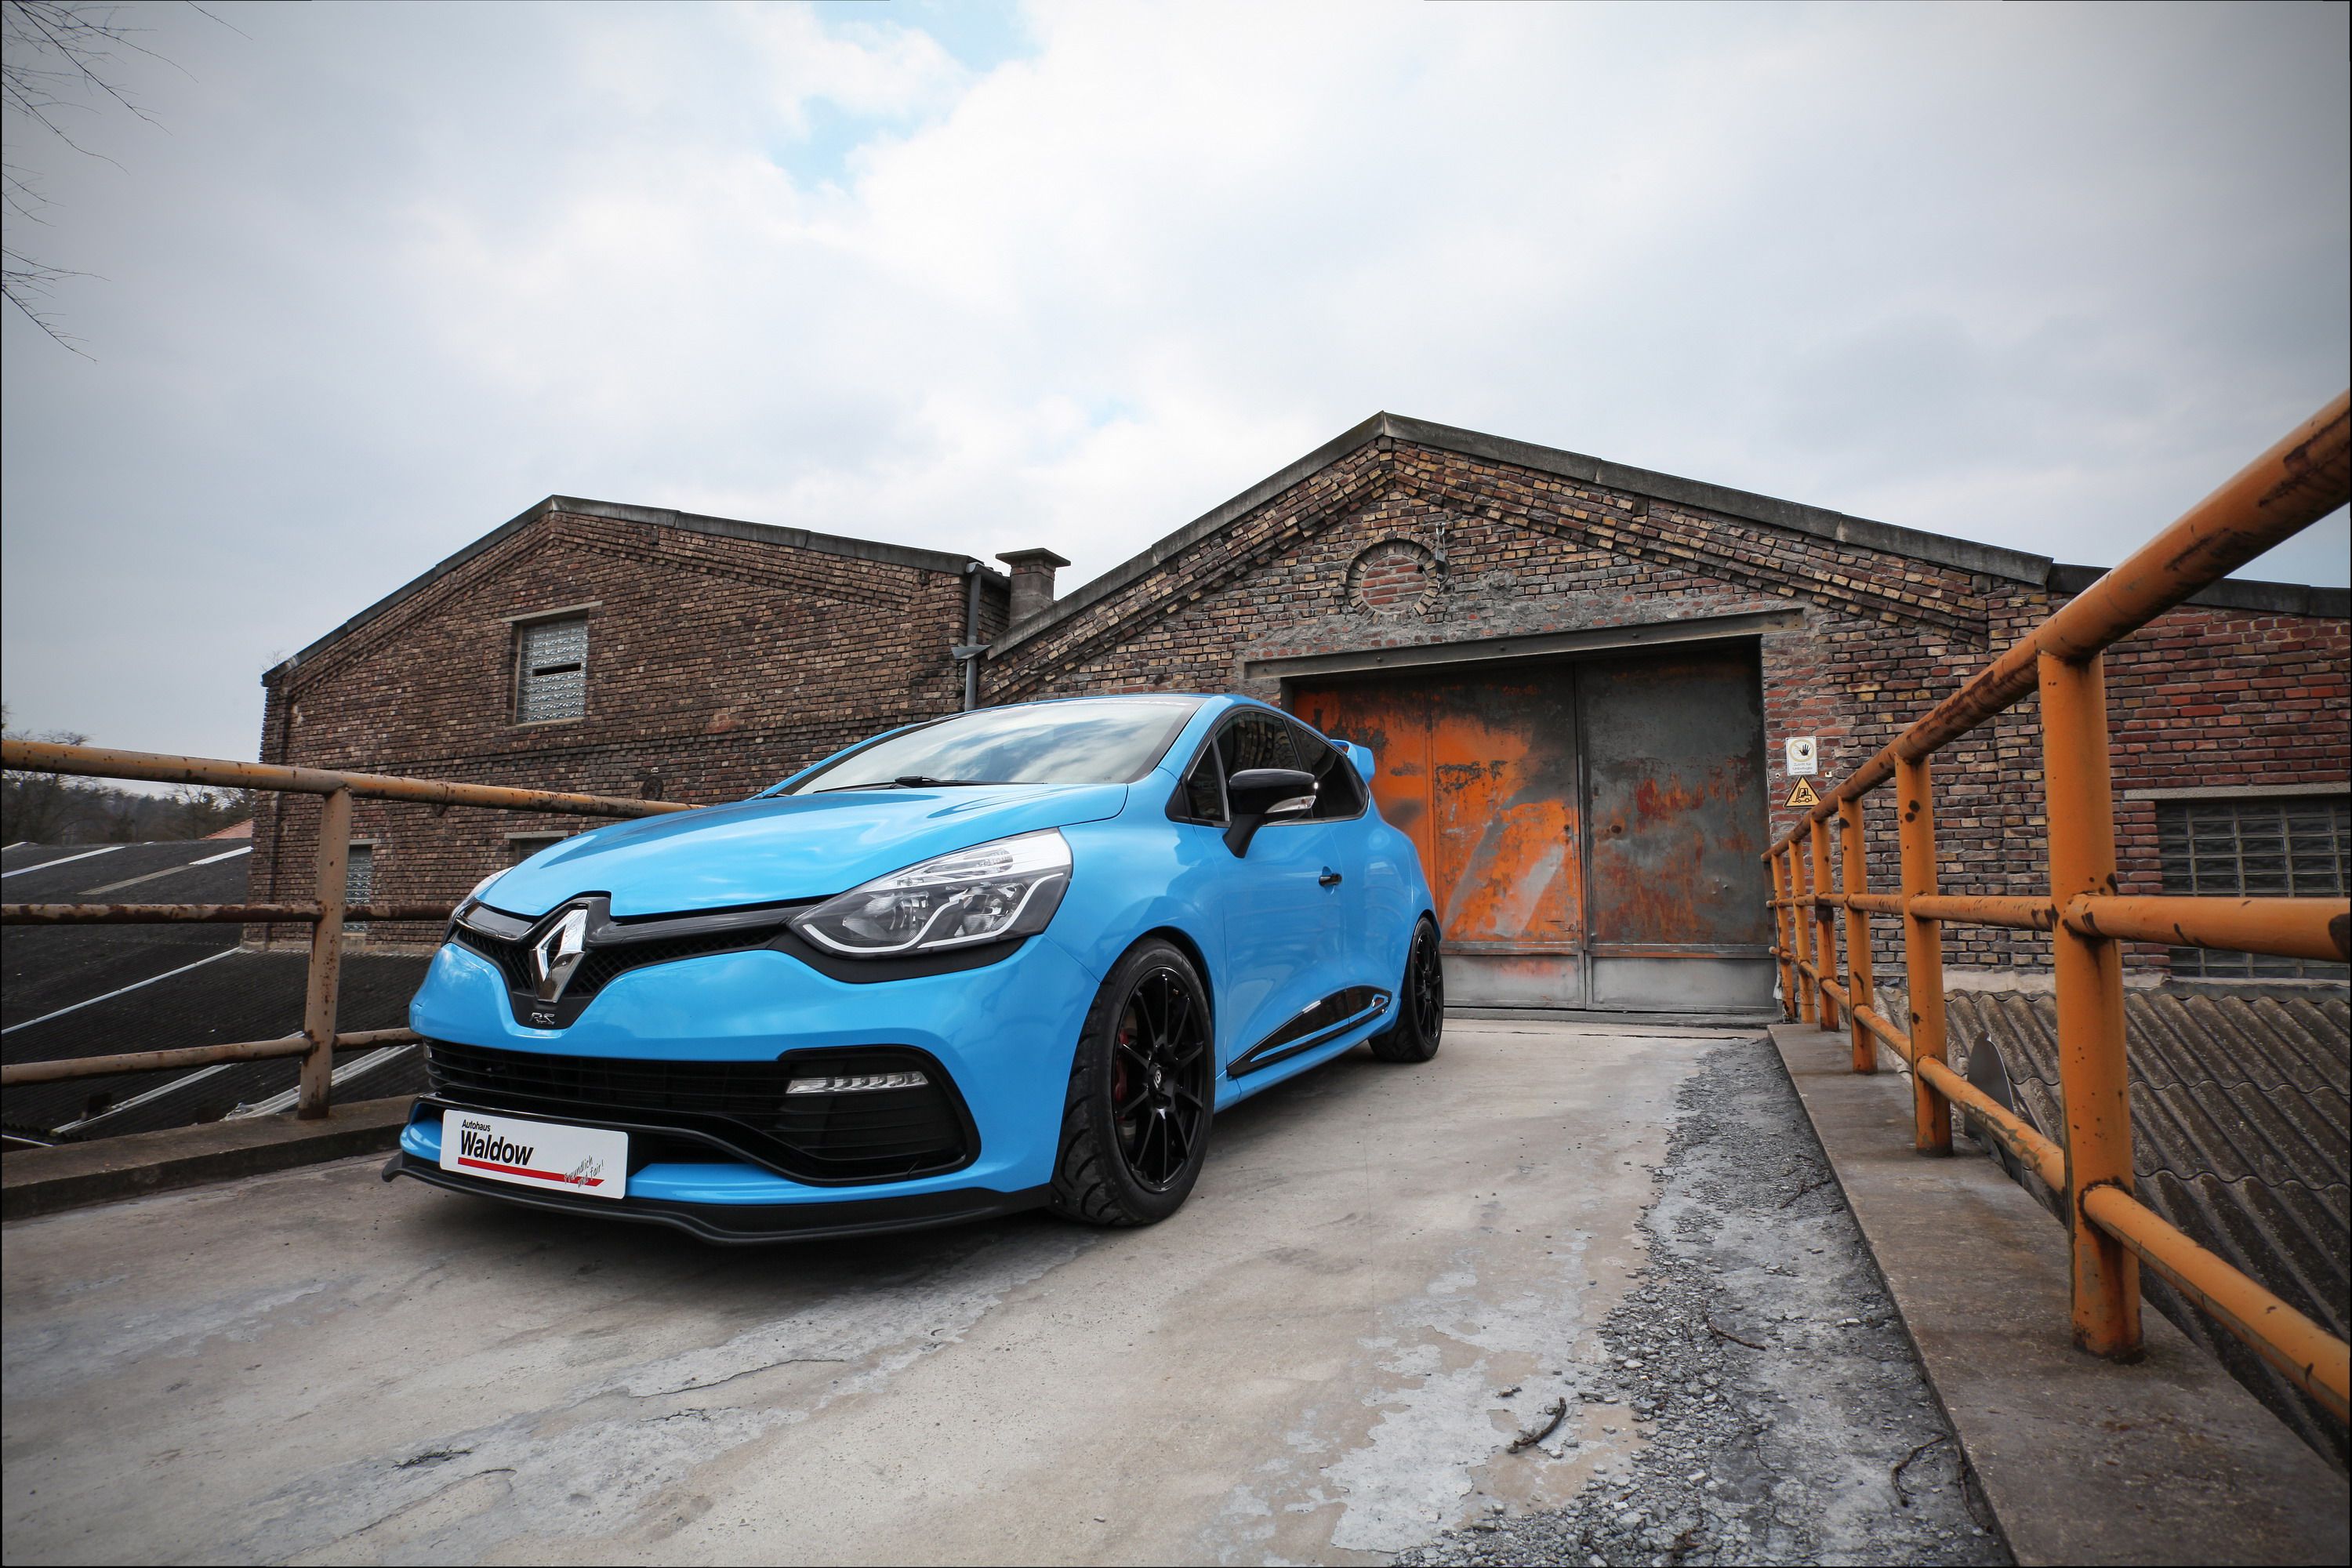 2016 Renault Clio 220 Trophy EDC by Waldow Performance